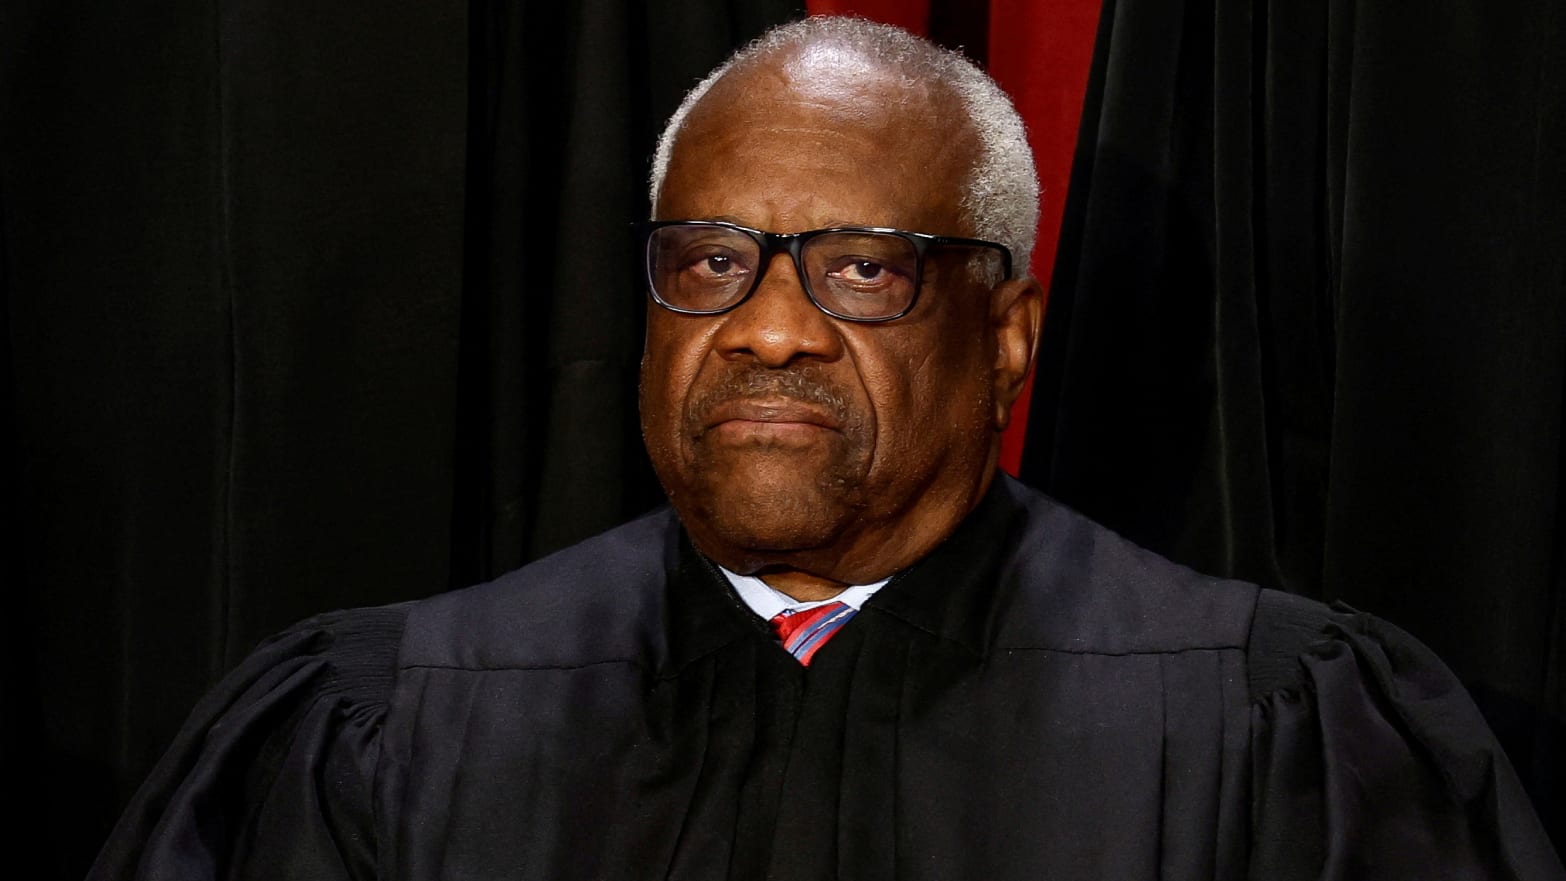 Clarence Thomas stares forward without smiling in a professional headshot.